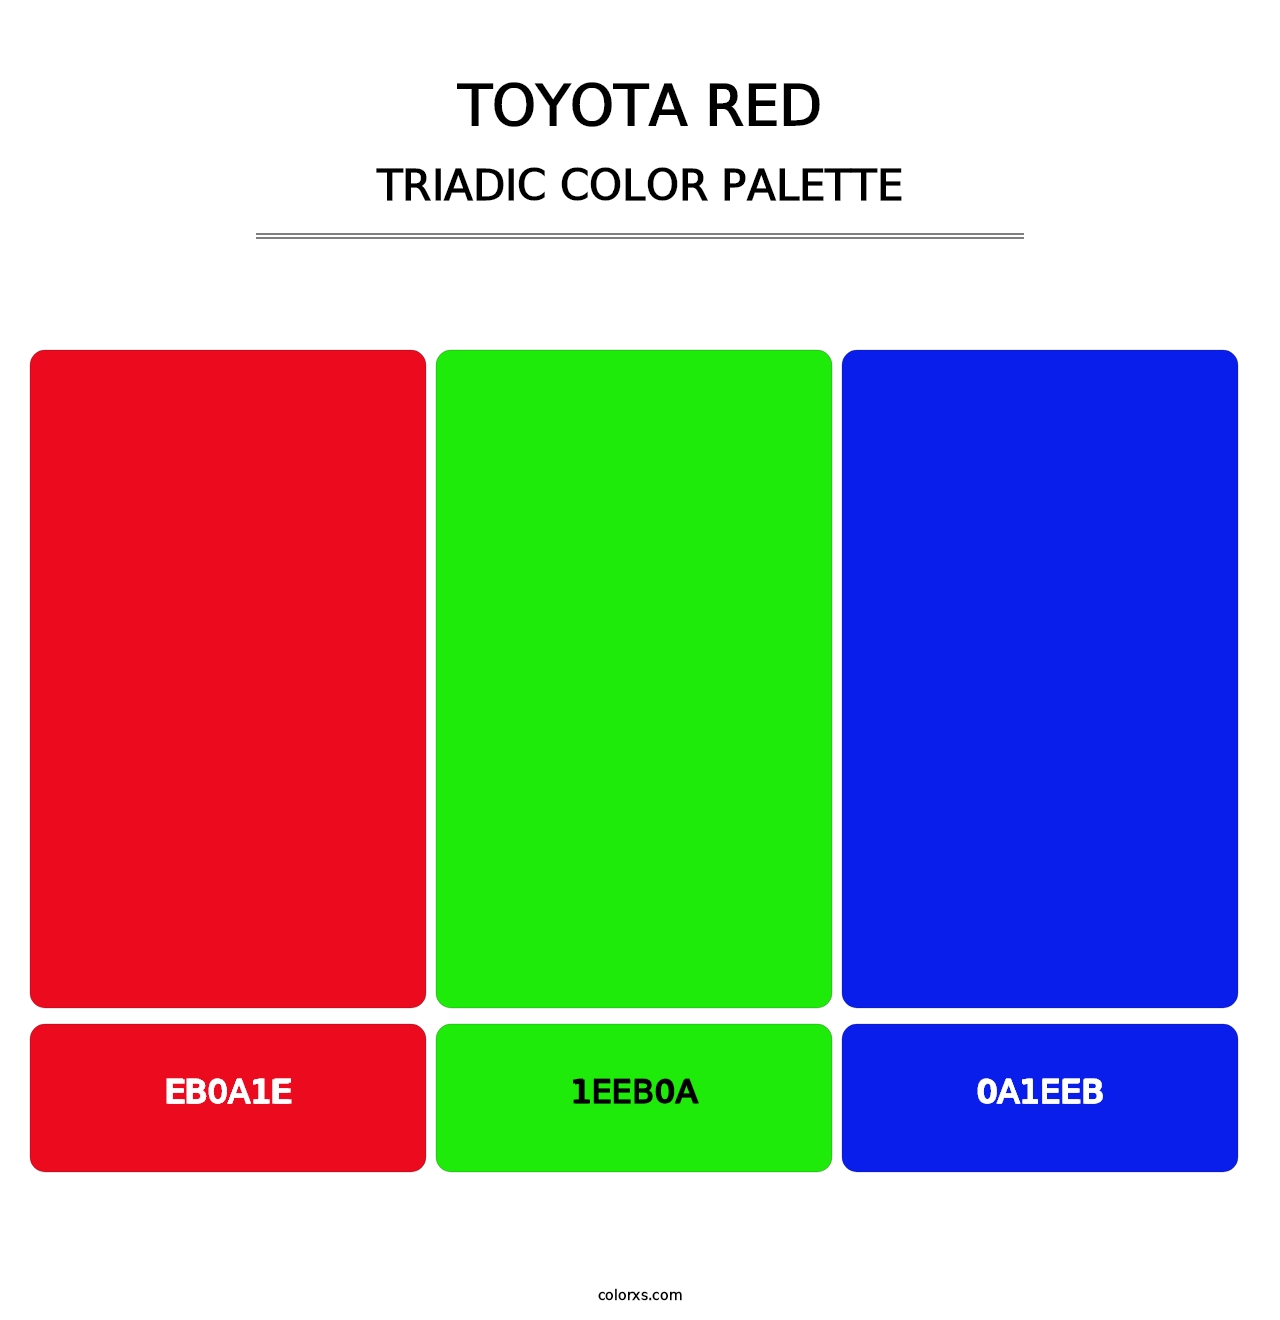 Toyota Red - Triadic Color Palette